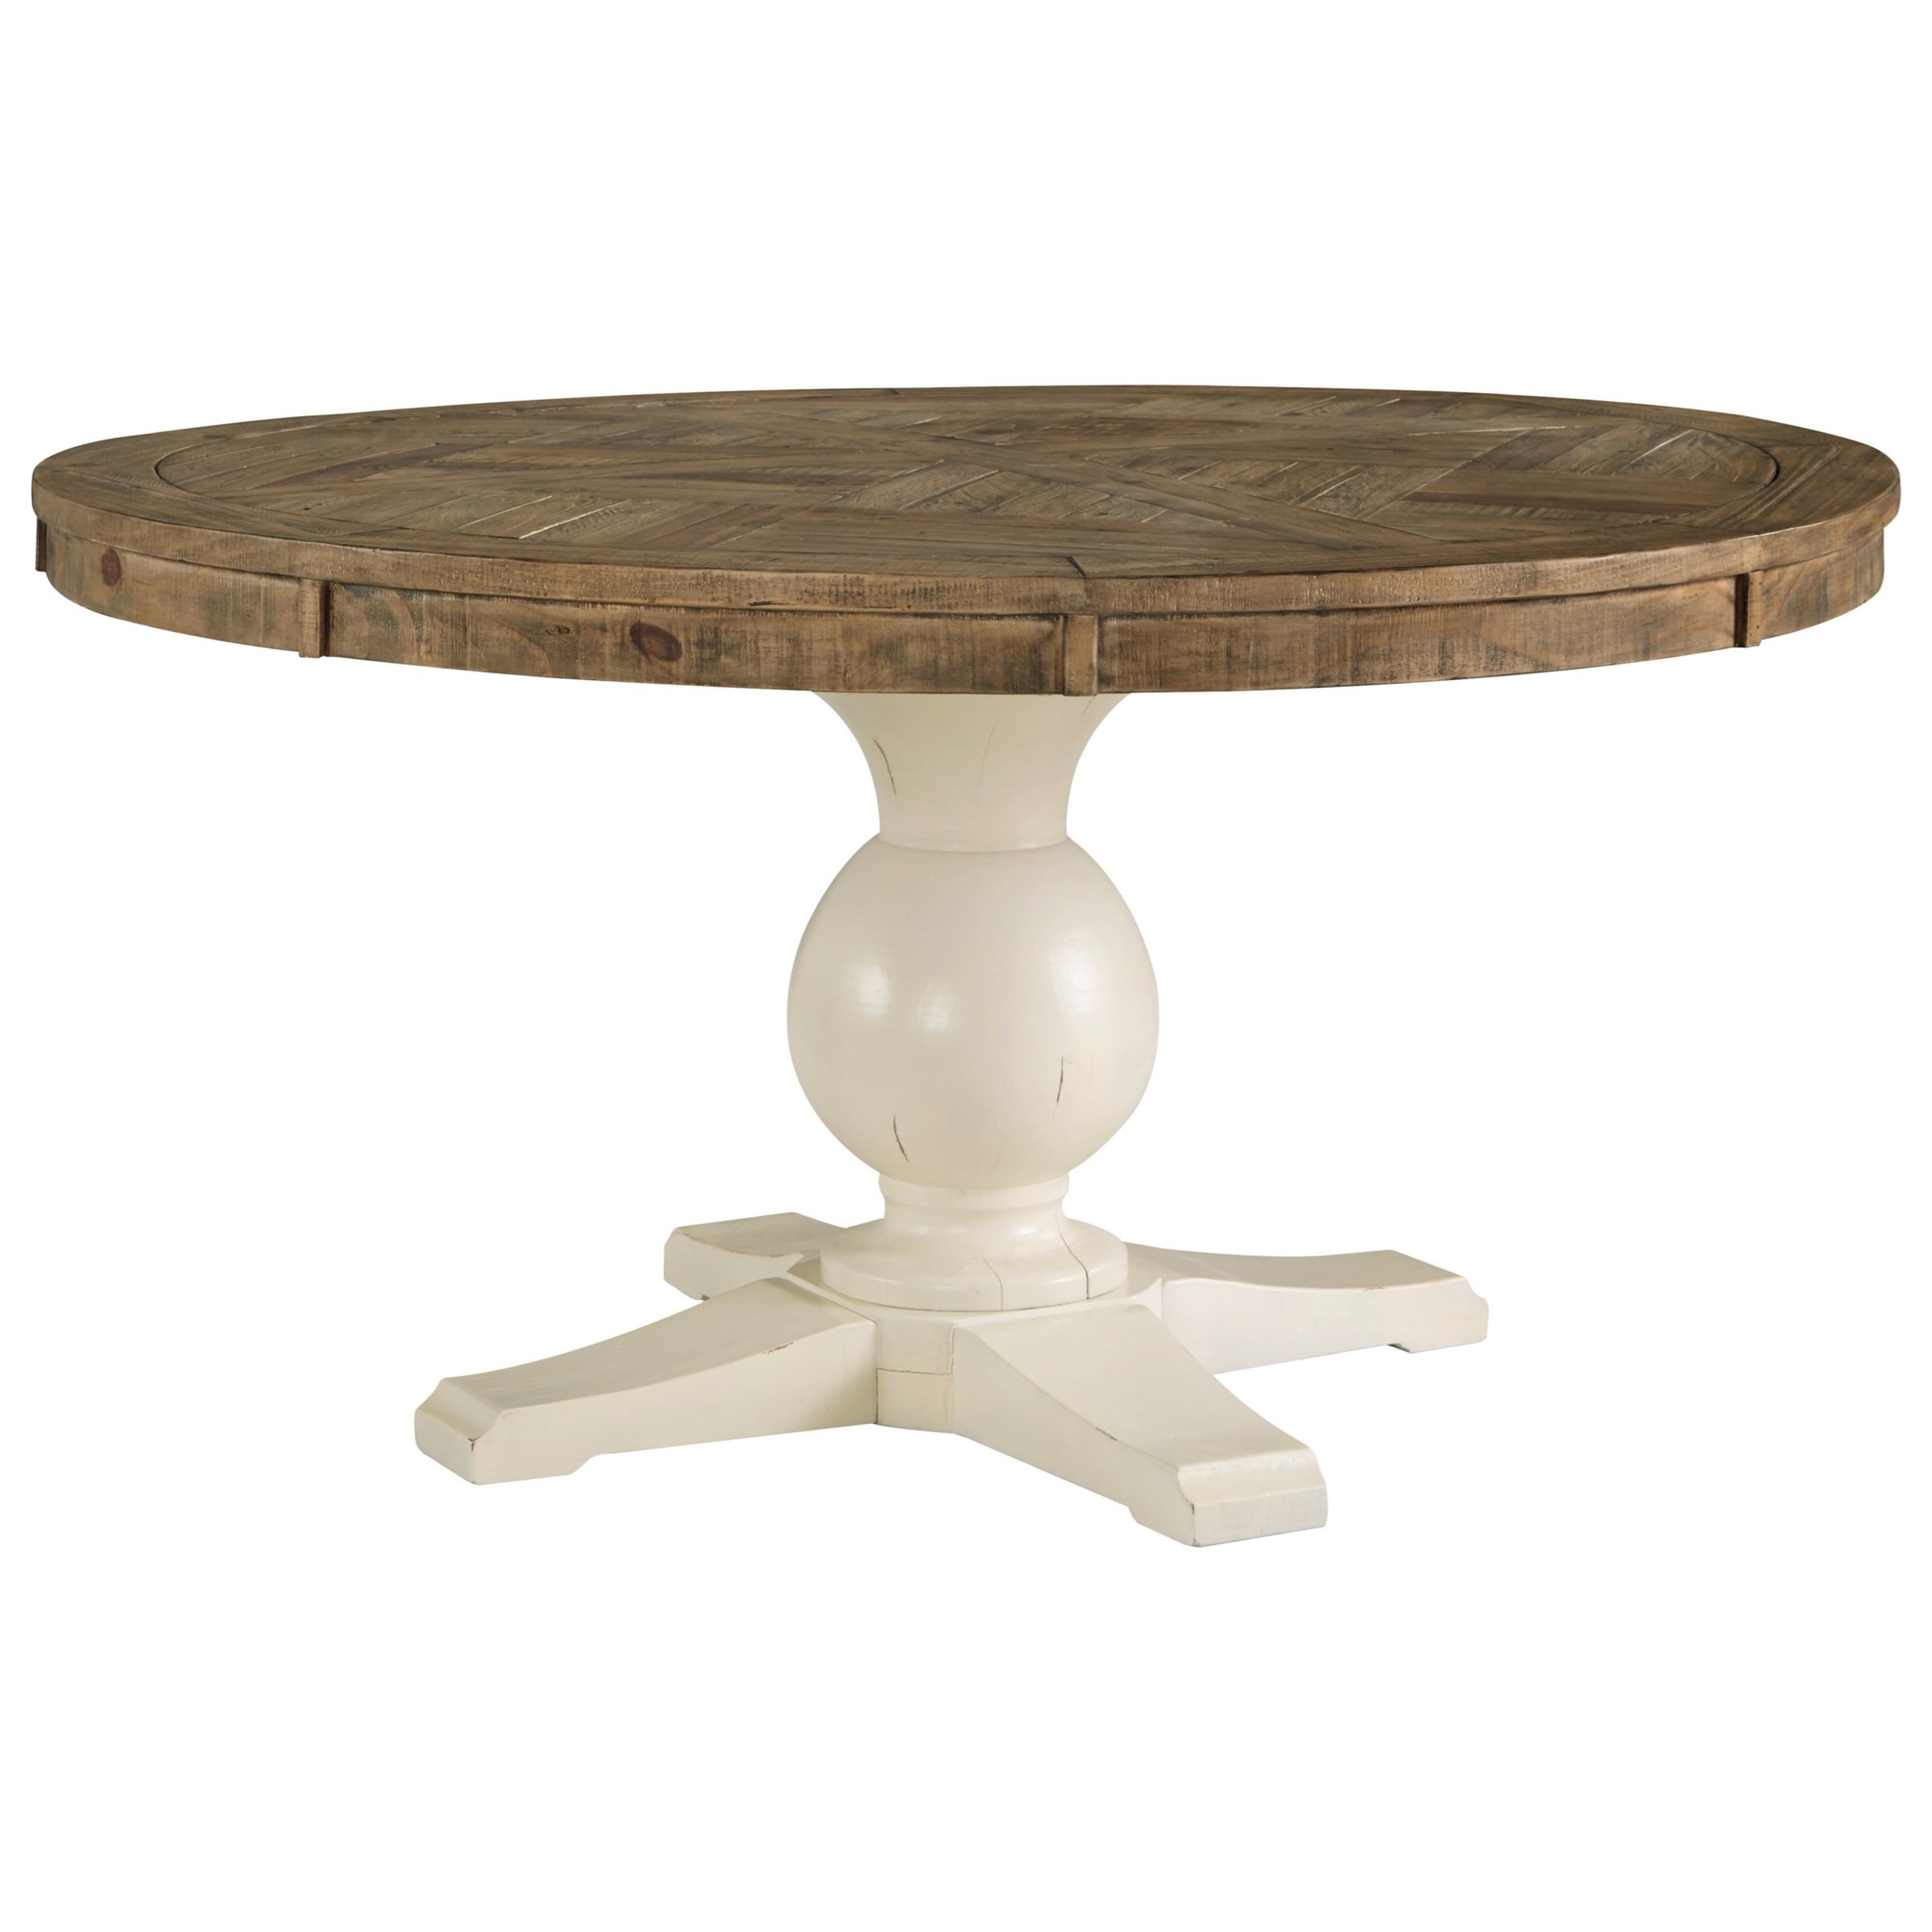 Signature Design by Ashley Grindleburg D754-50B+50T Round Dining Room ...